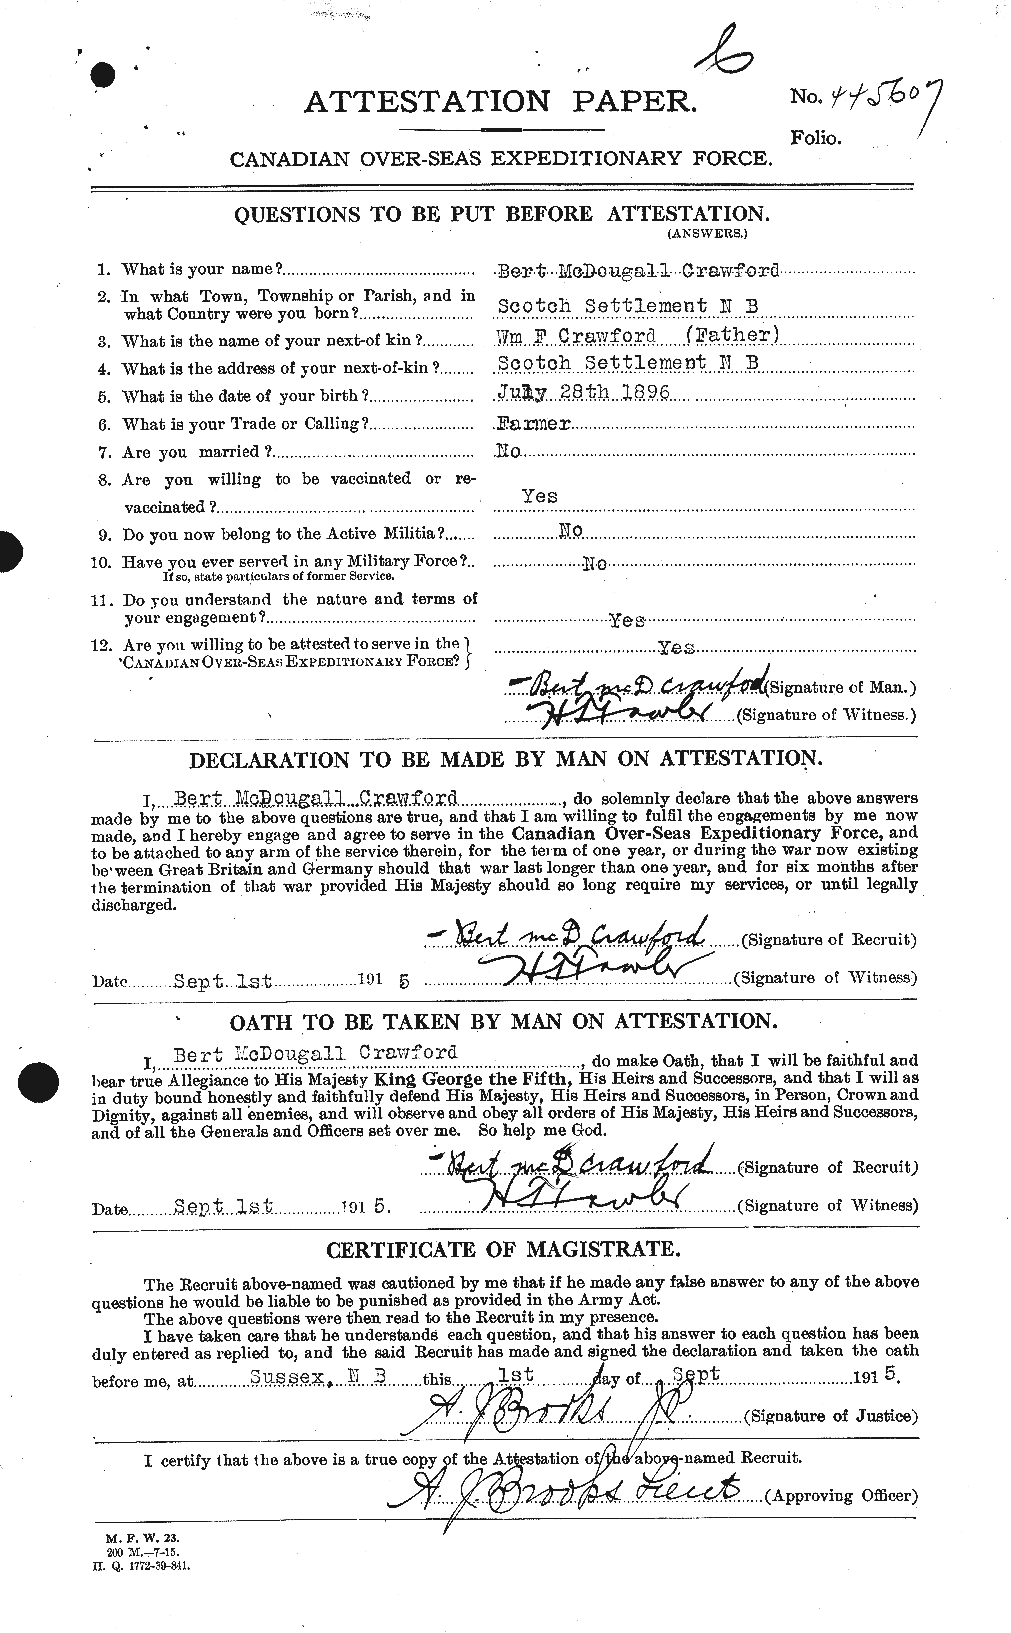 Personnel Records of the First World War - CEF 060918a